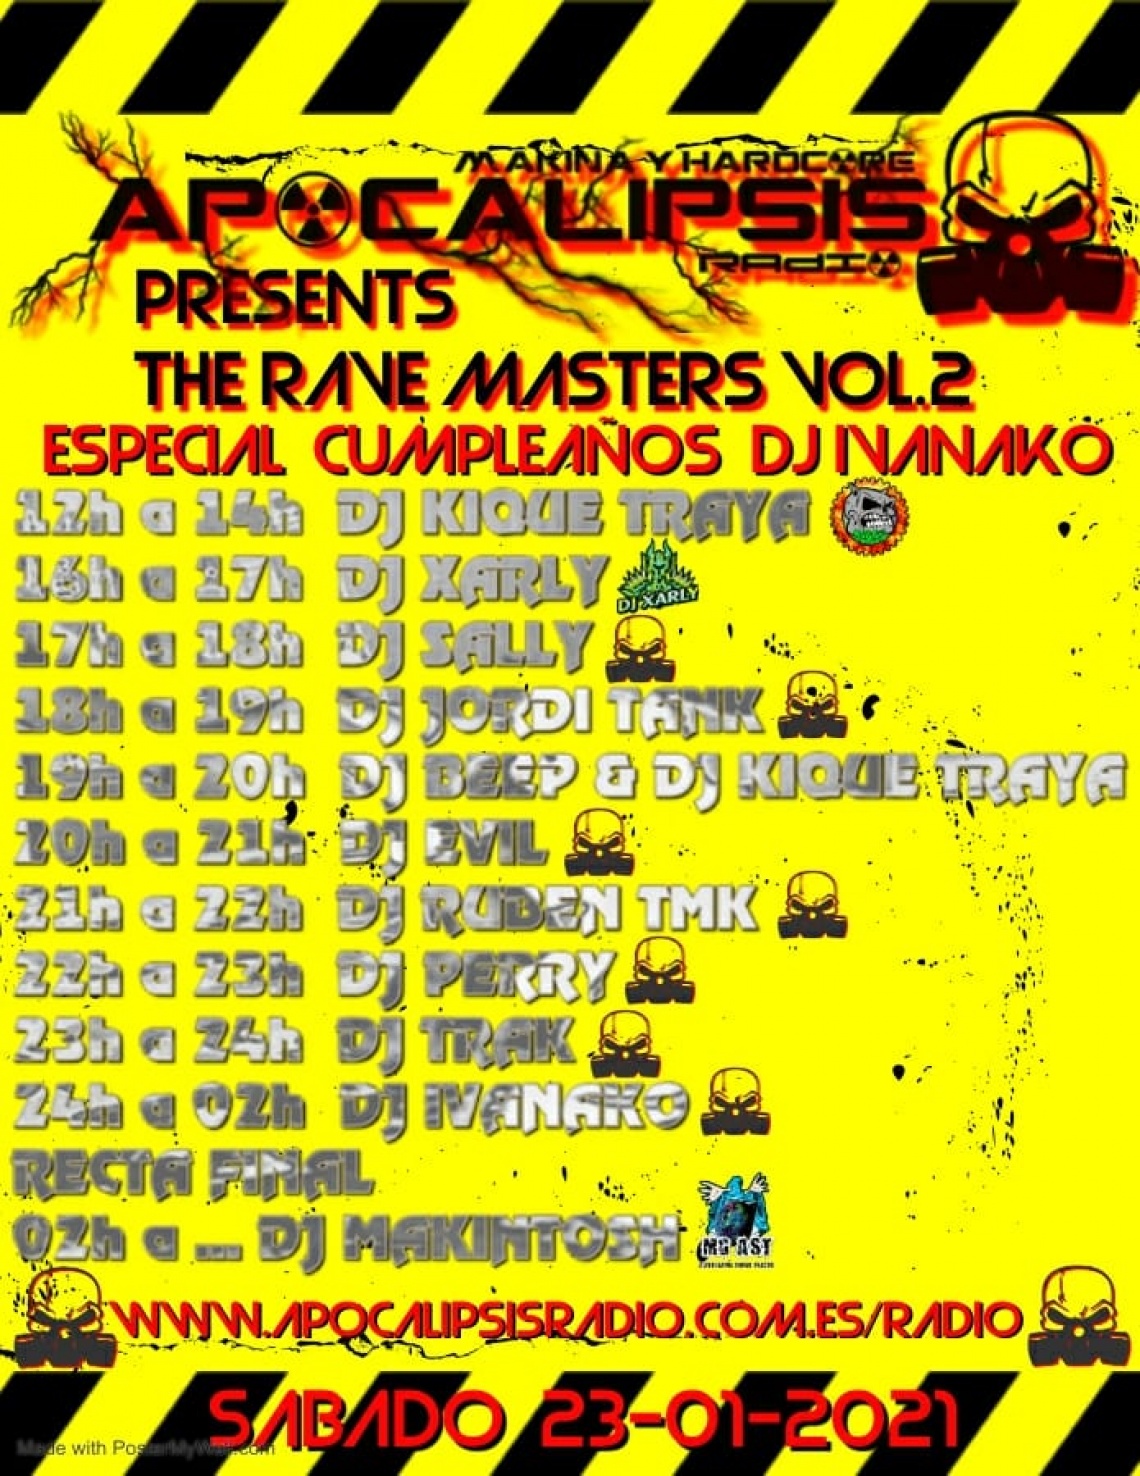 The Rave Masters vol 2